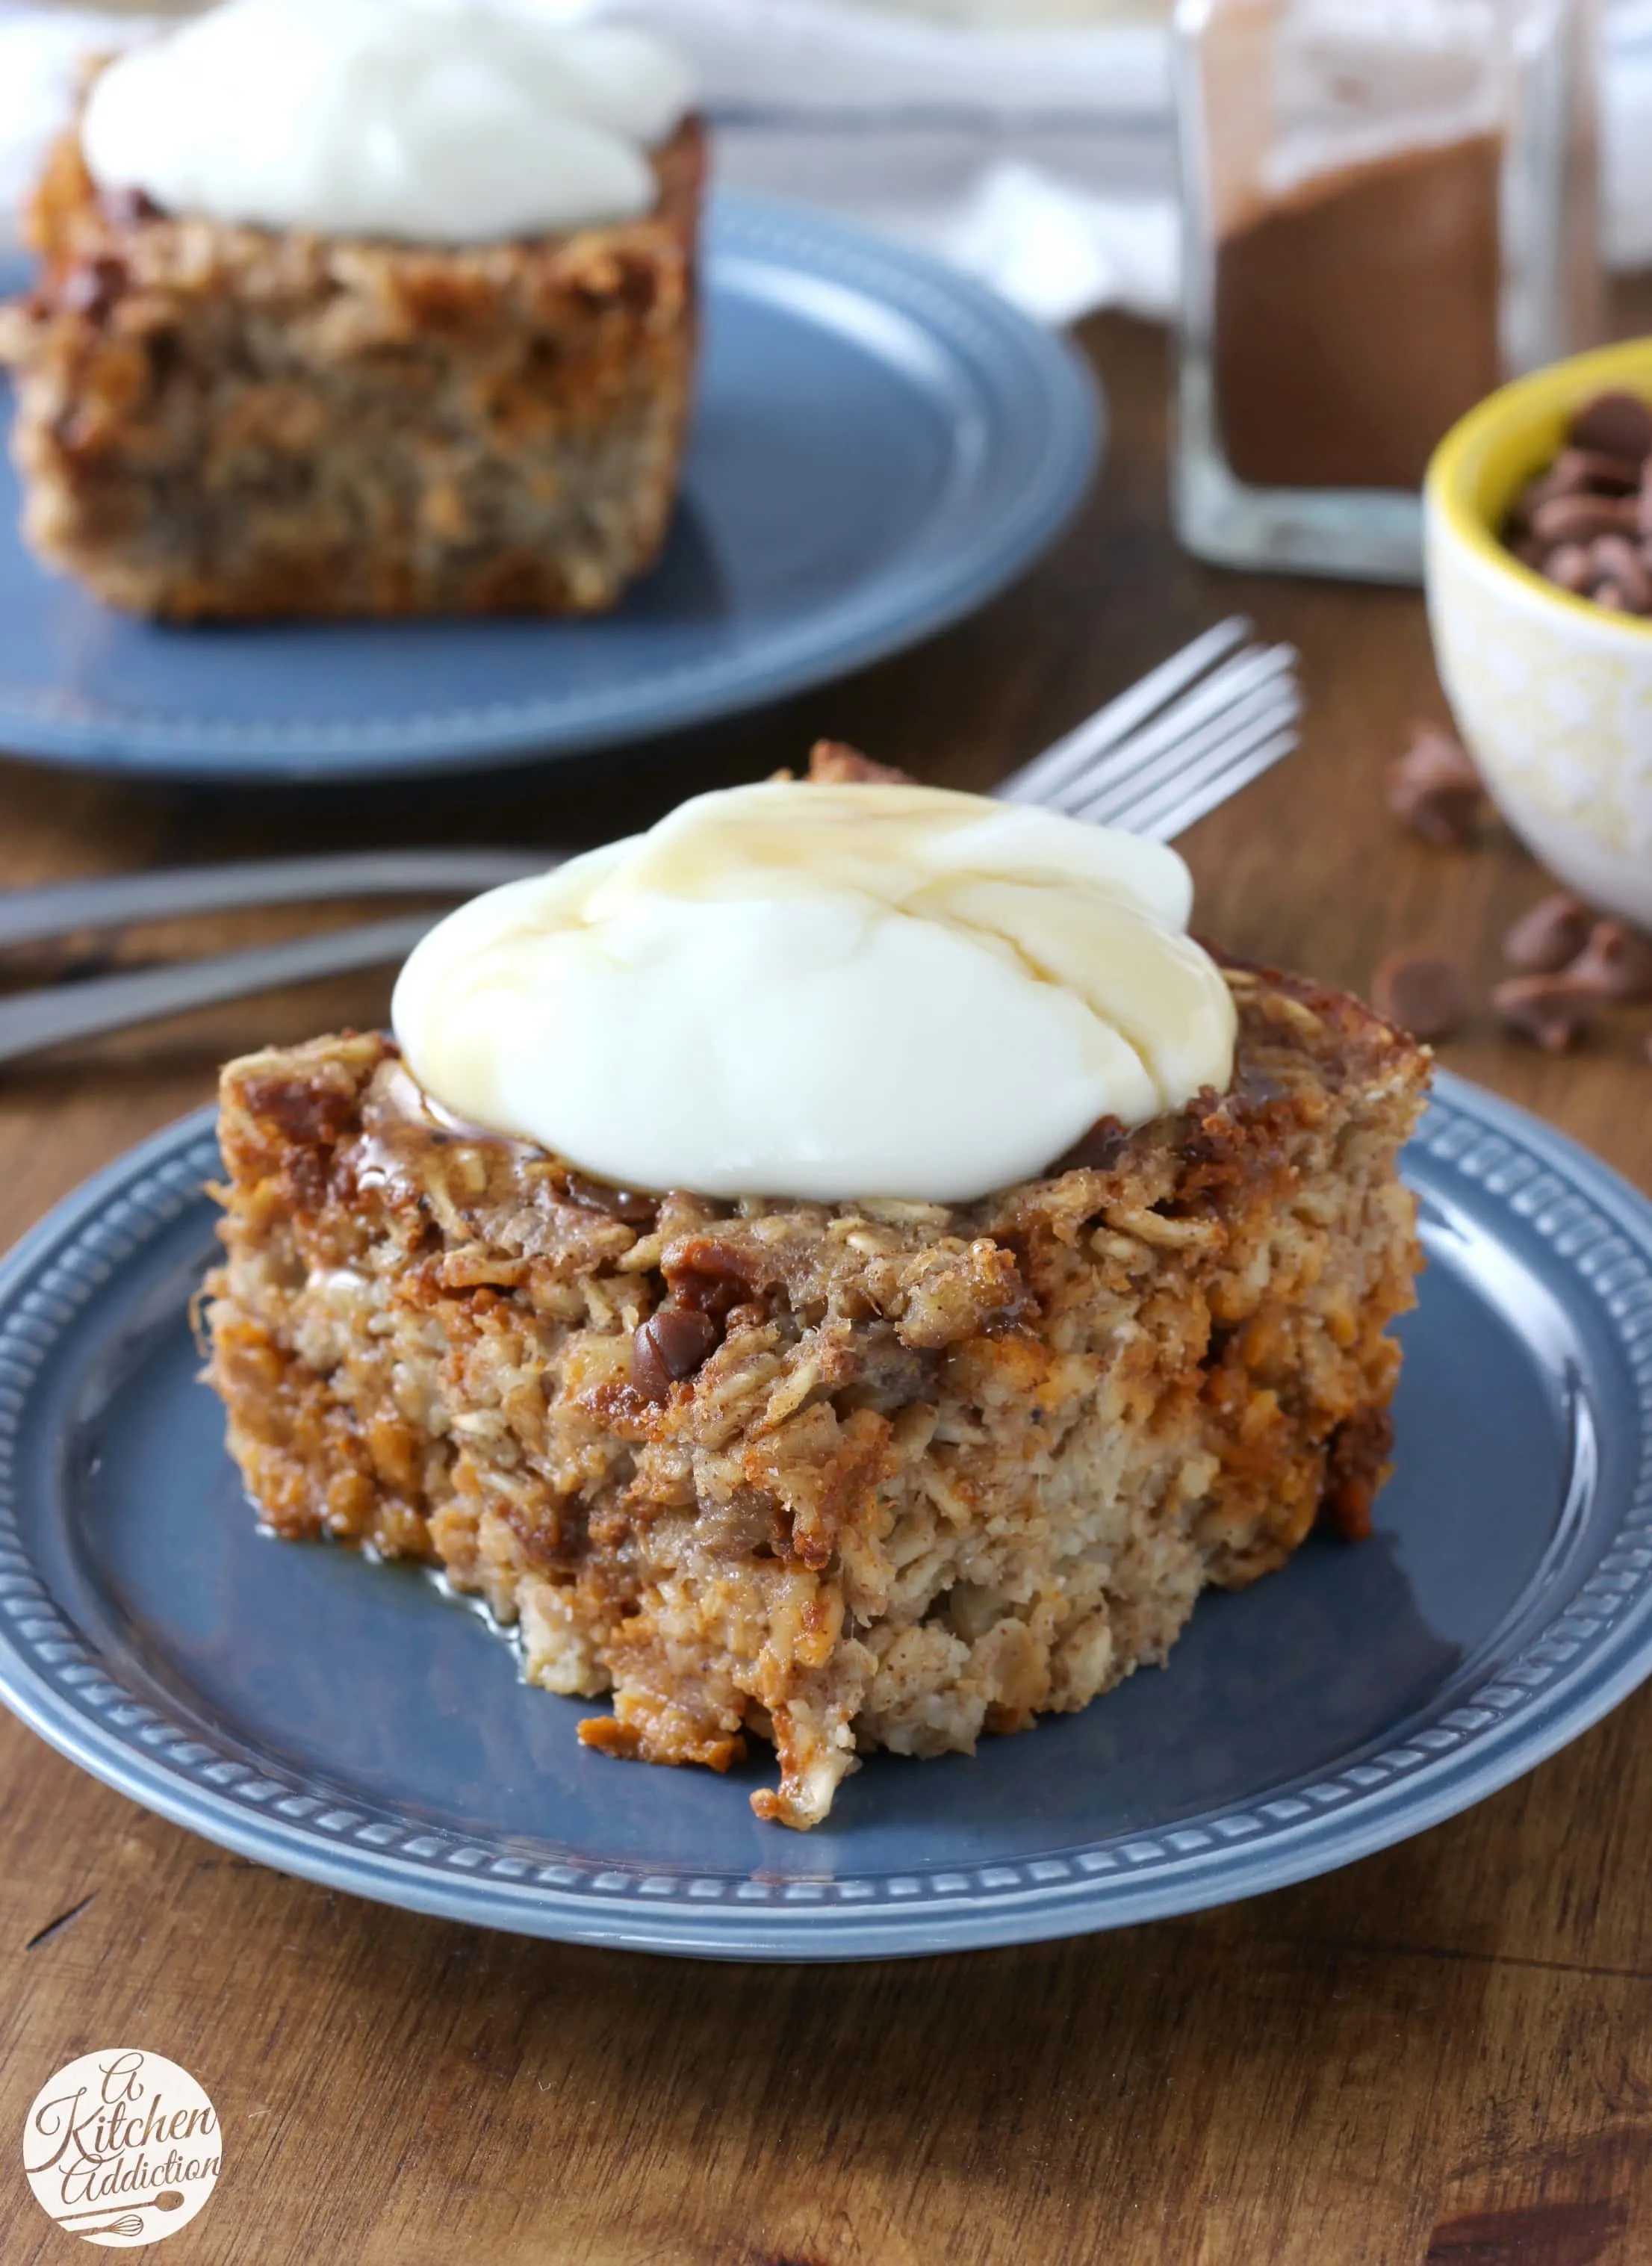 Cinnamon Chip Banana Bread Baked Oatmeal that can be made the night before! Recipe from A Kitchen Addiction